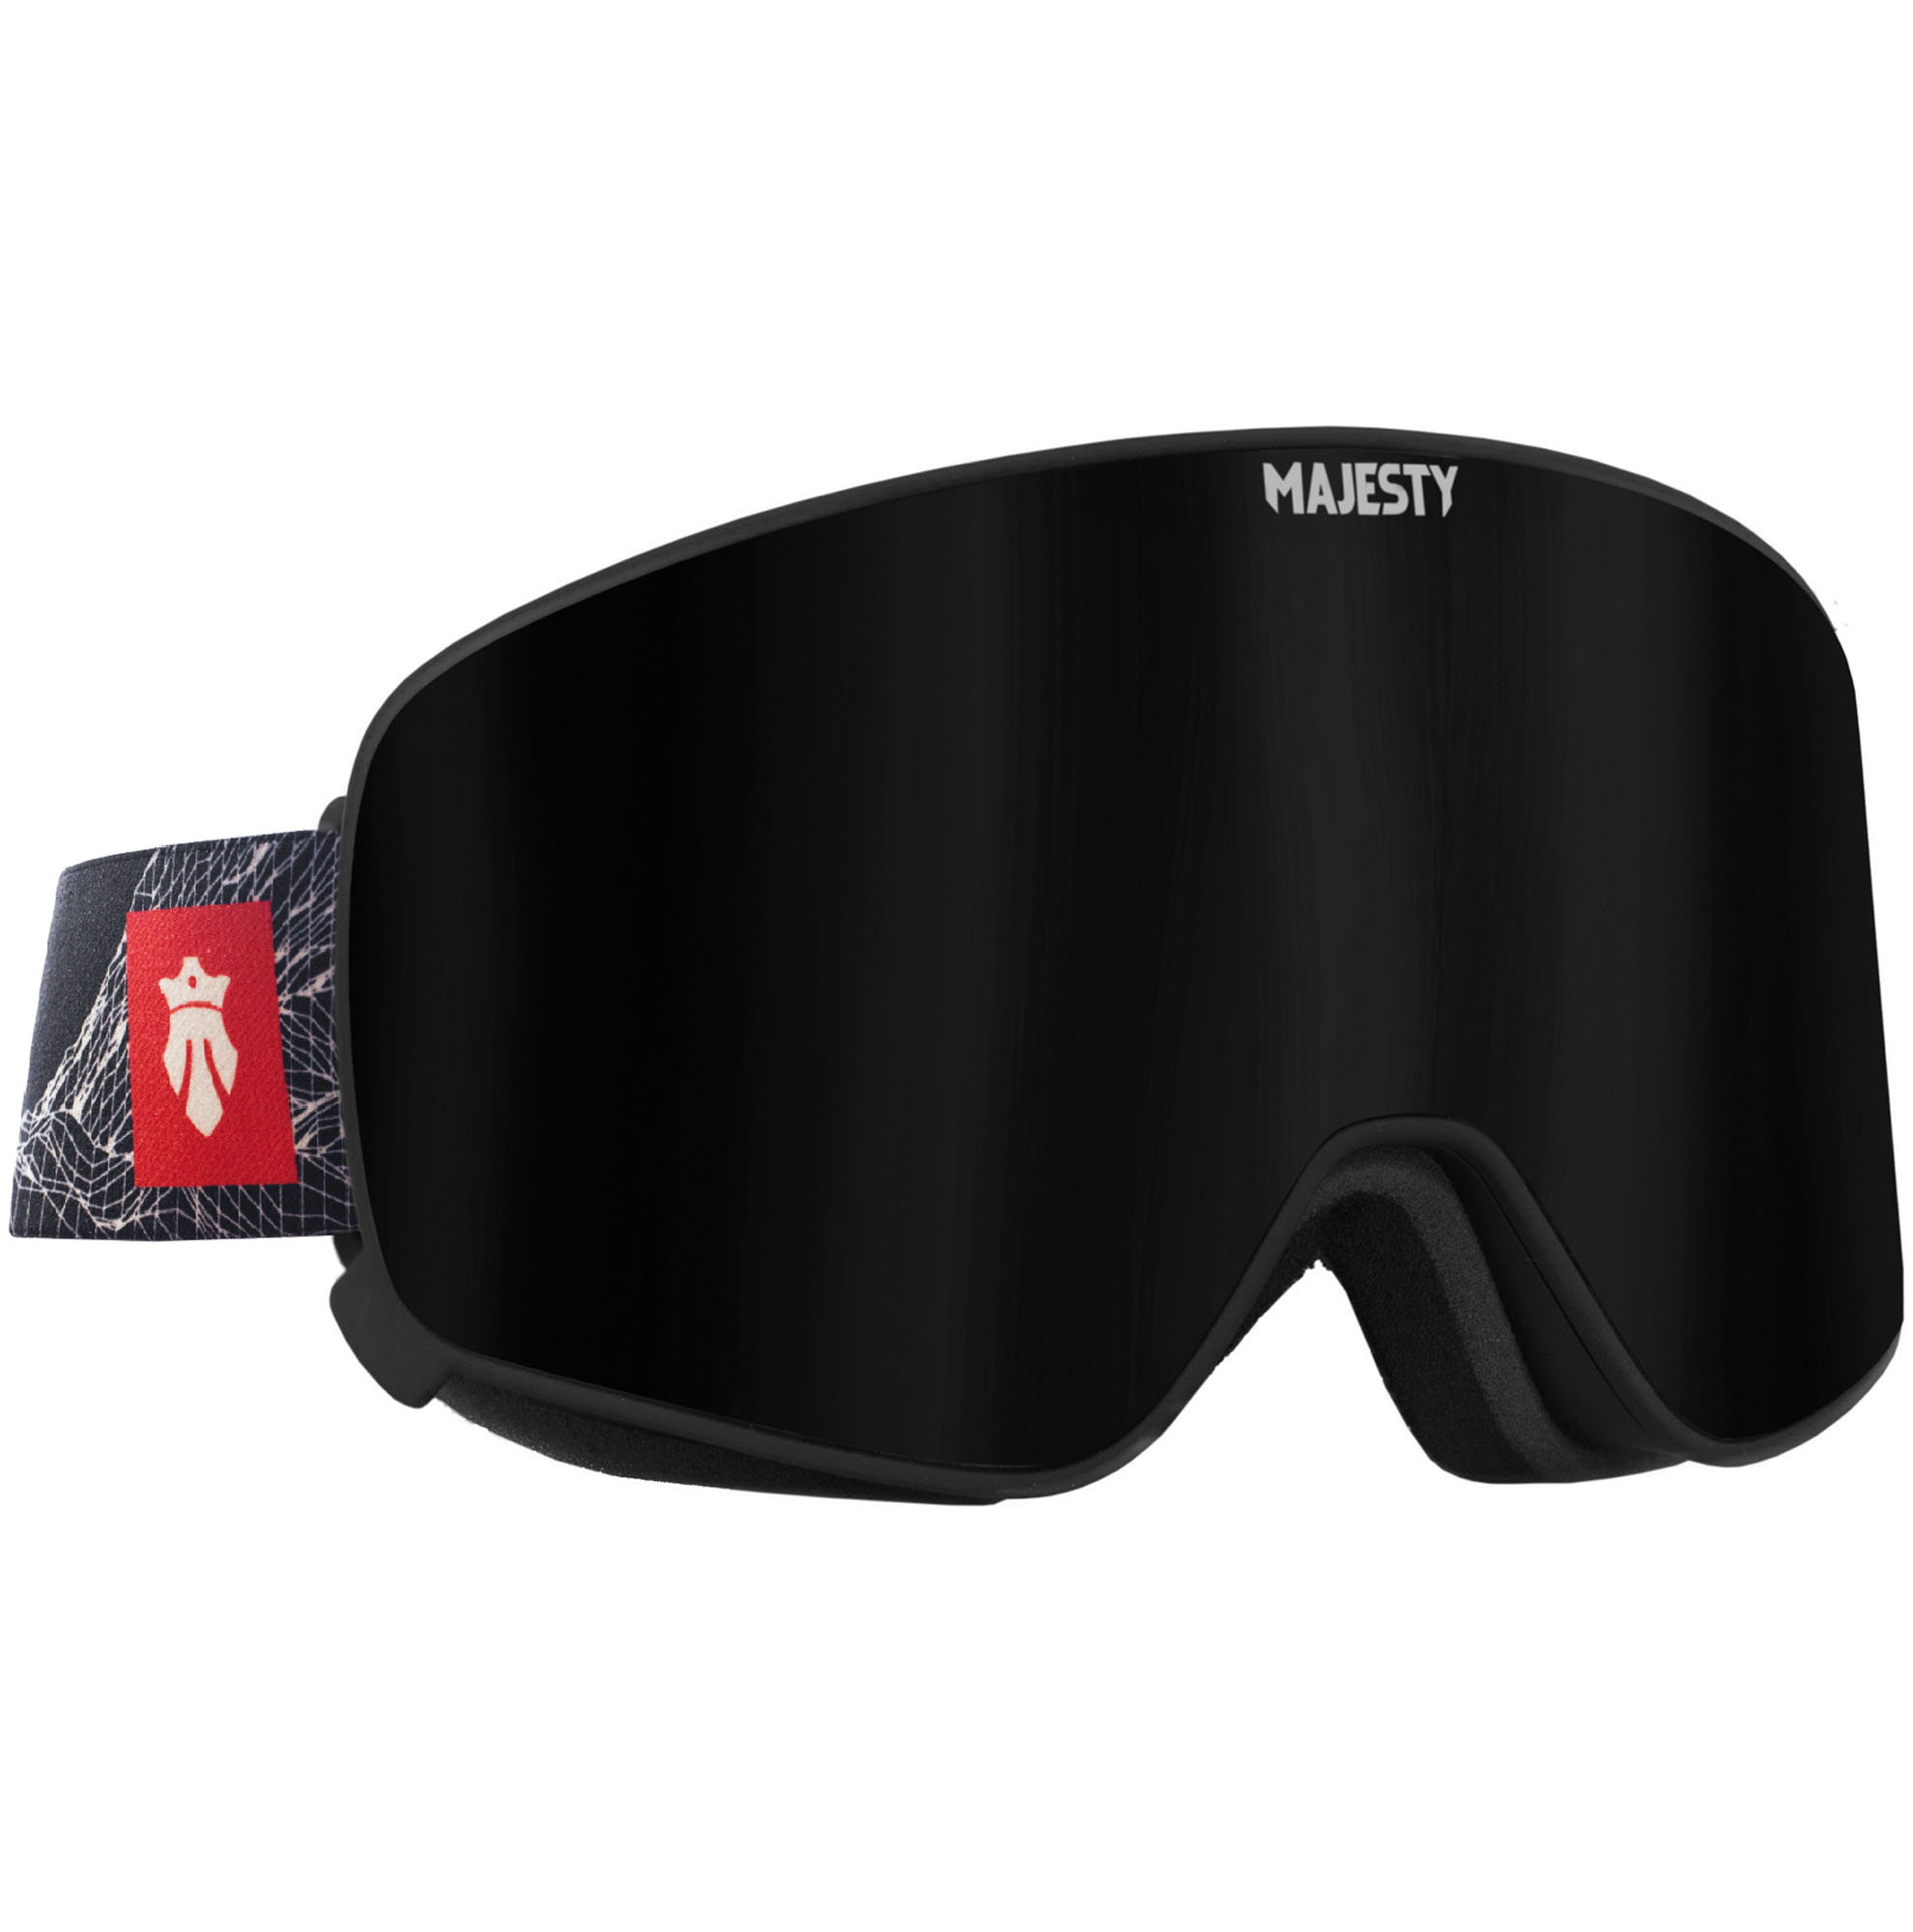 Goggles Official XENON Online SKIS - MAJESTY Force frame / black HD MAJESTY lens Ski pearl Moonstone - C Store - Magnetic The black + Skis MAJESTY